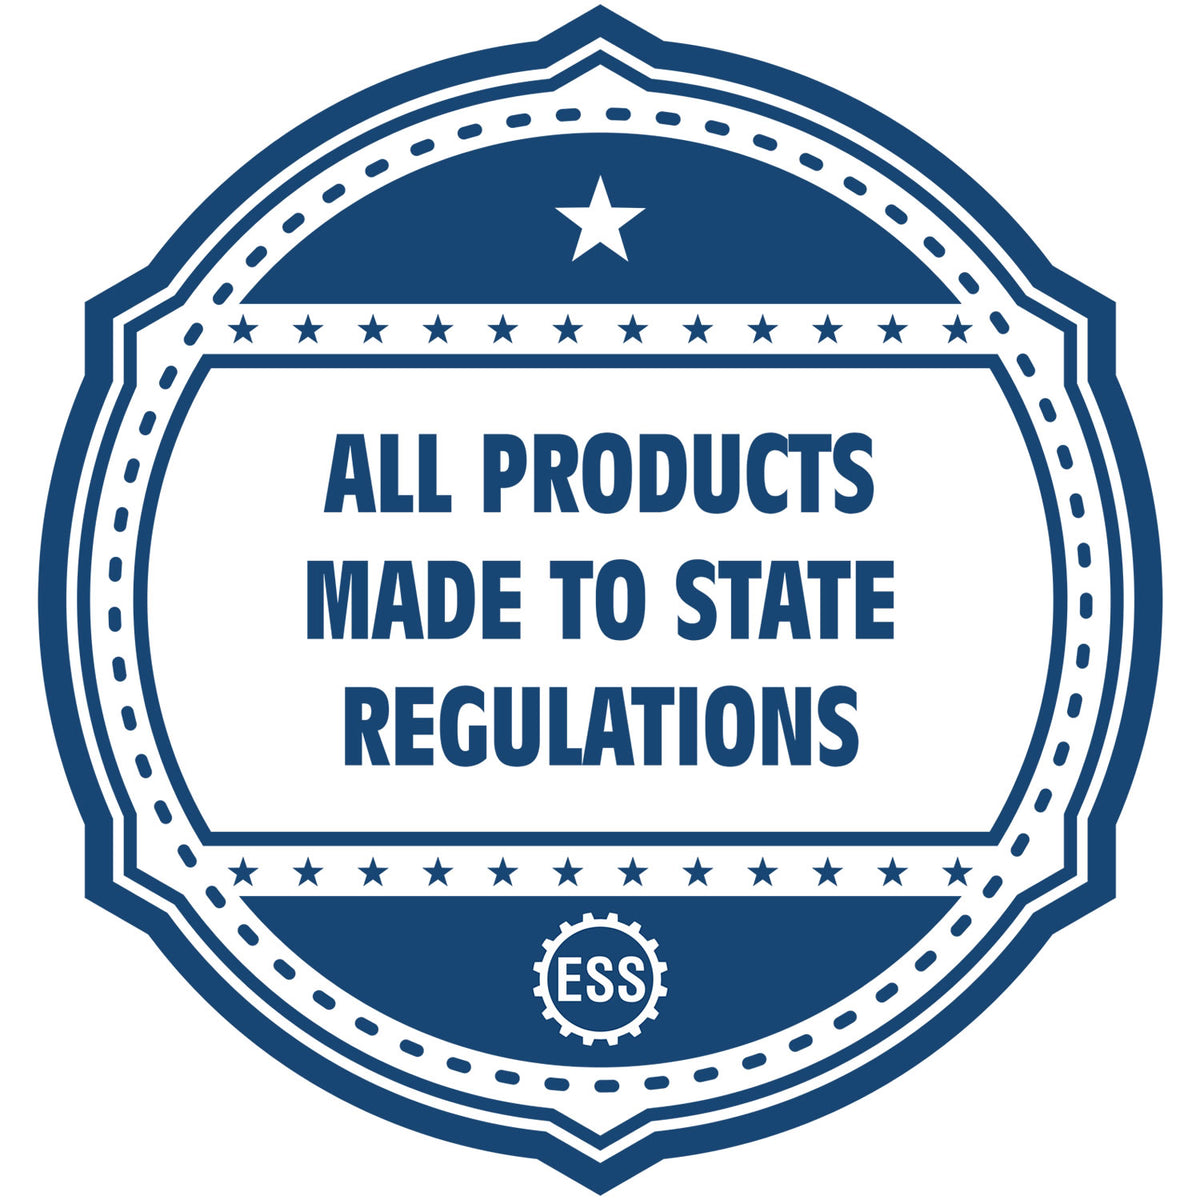 An icon or badge element for the Heavy Duty Cast Iron Alabama Engineer Seal Embosser showing that this product is made in compliance with state regulations.